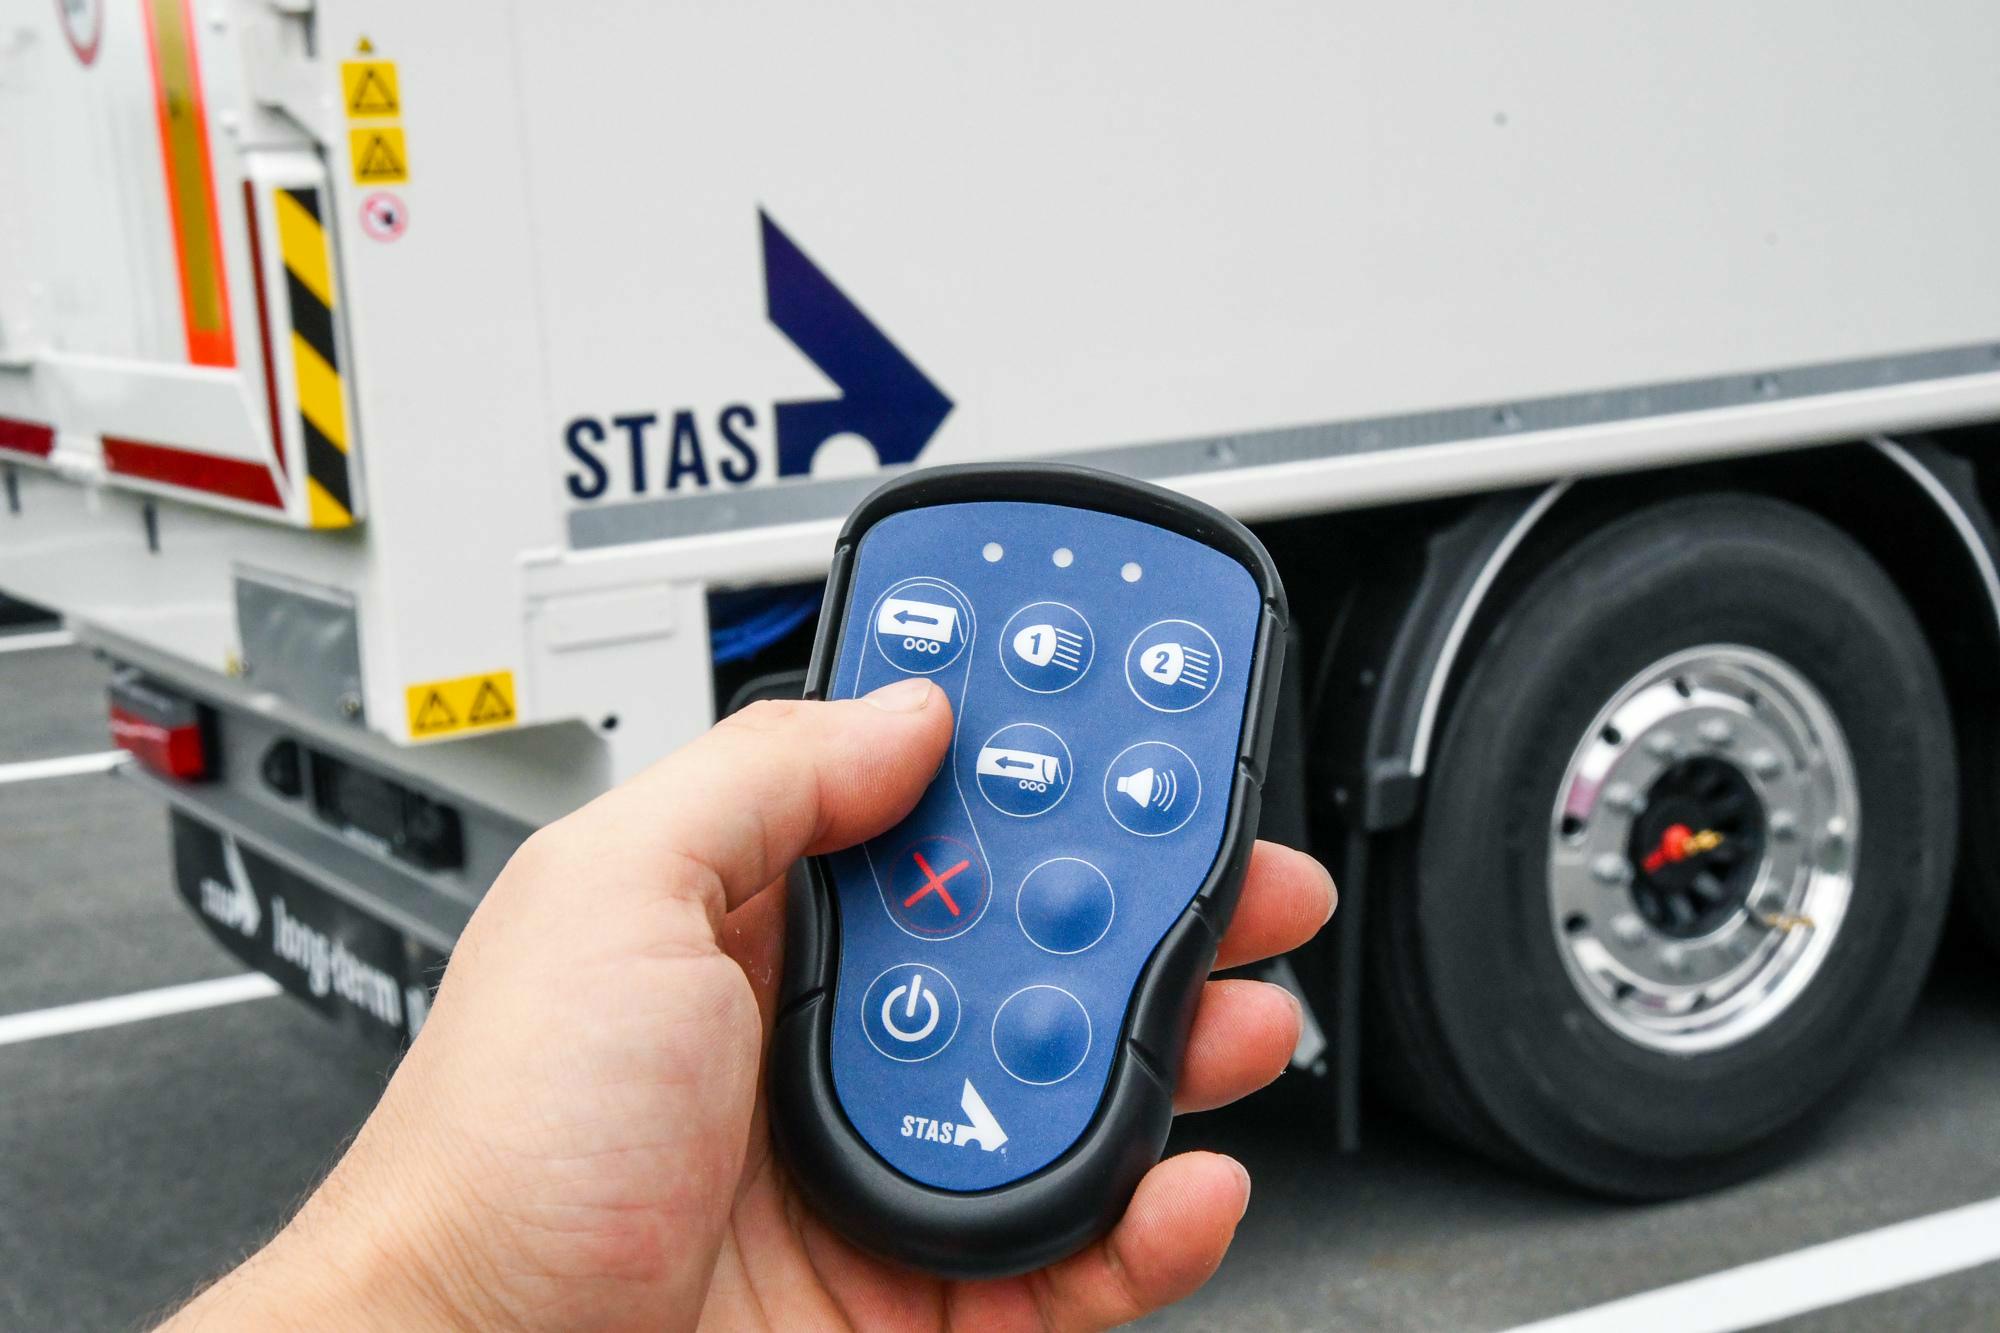 Remote control for walking floor trailers